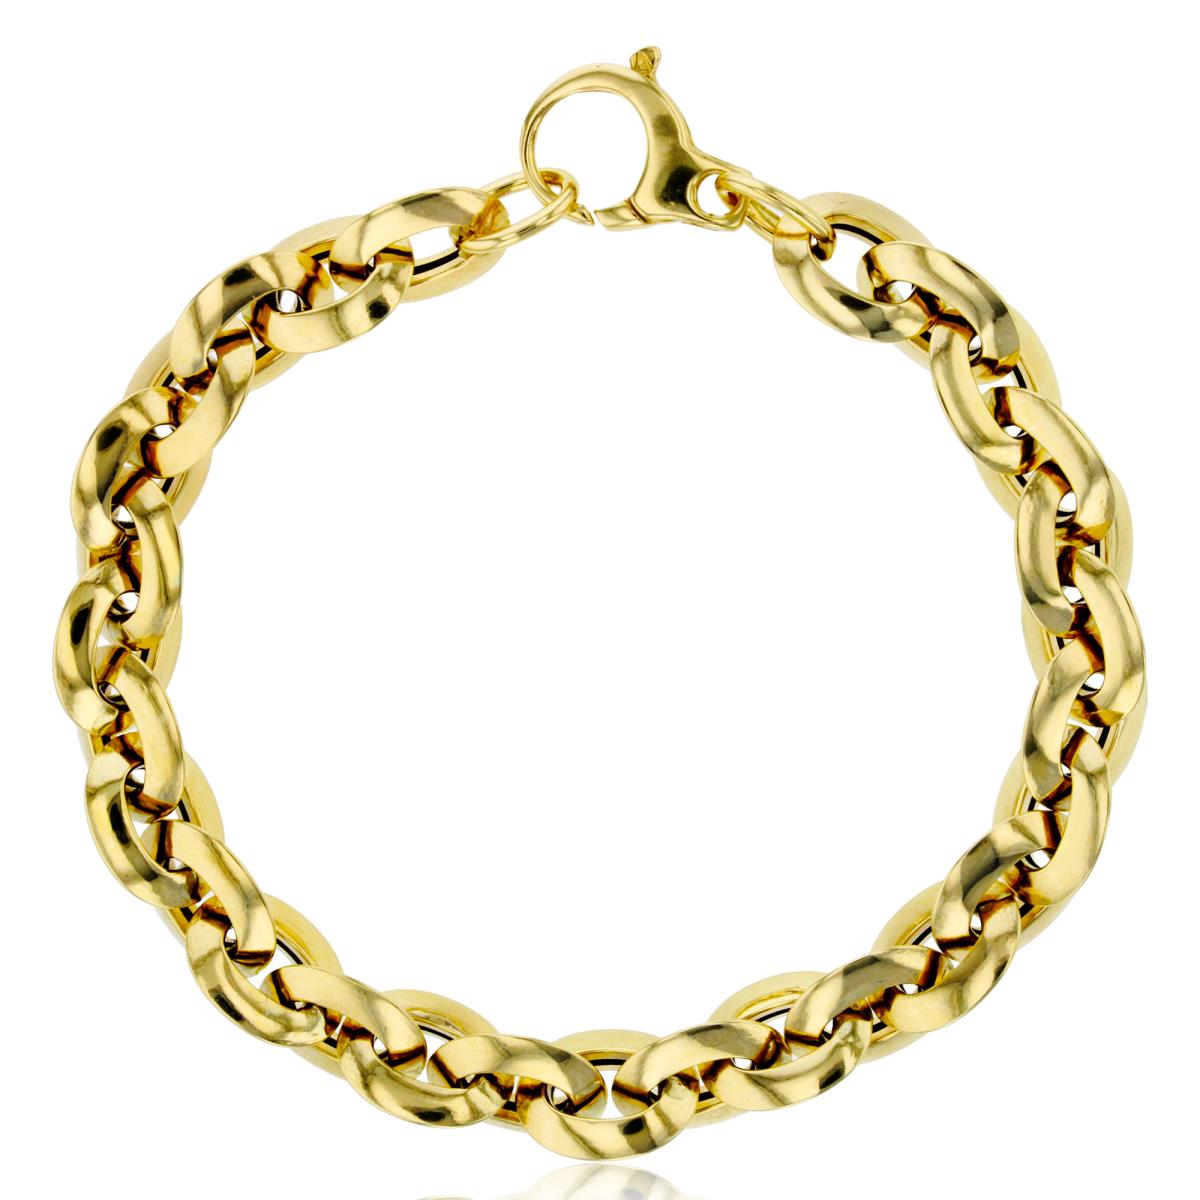 14K Yellow Gold Polished Fancy Cable 7.75" Bracelet